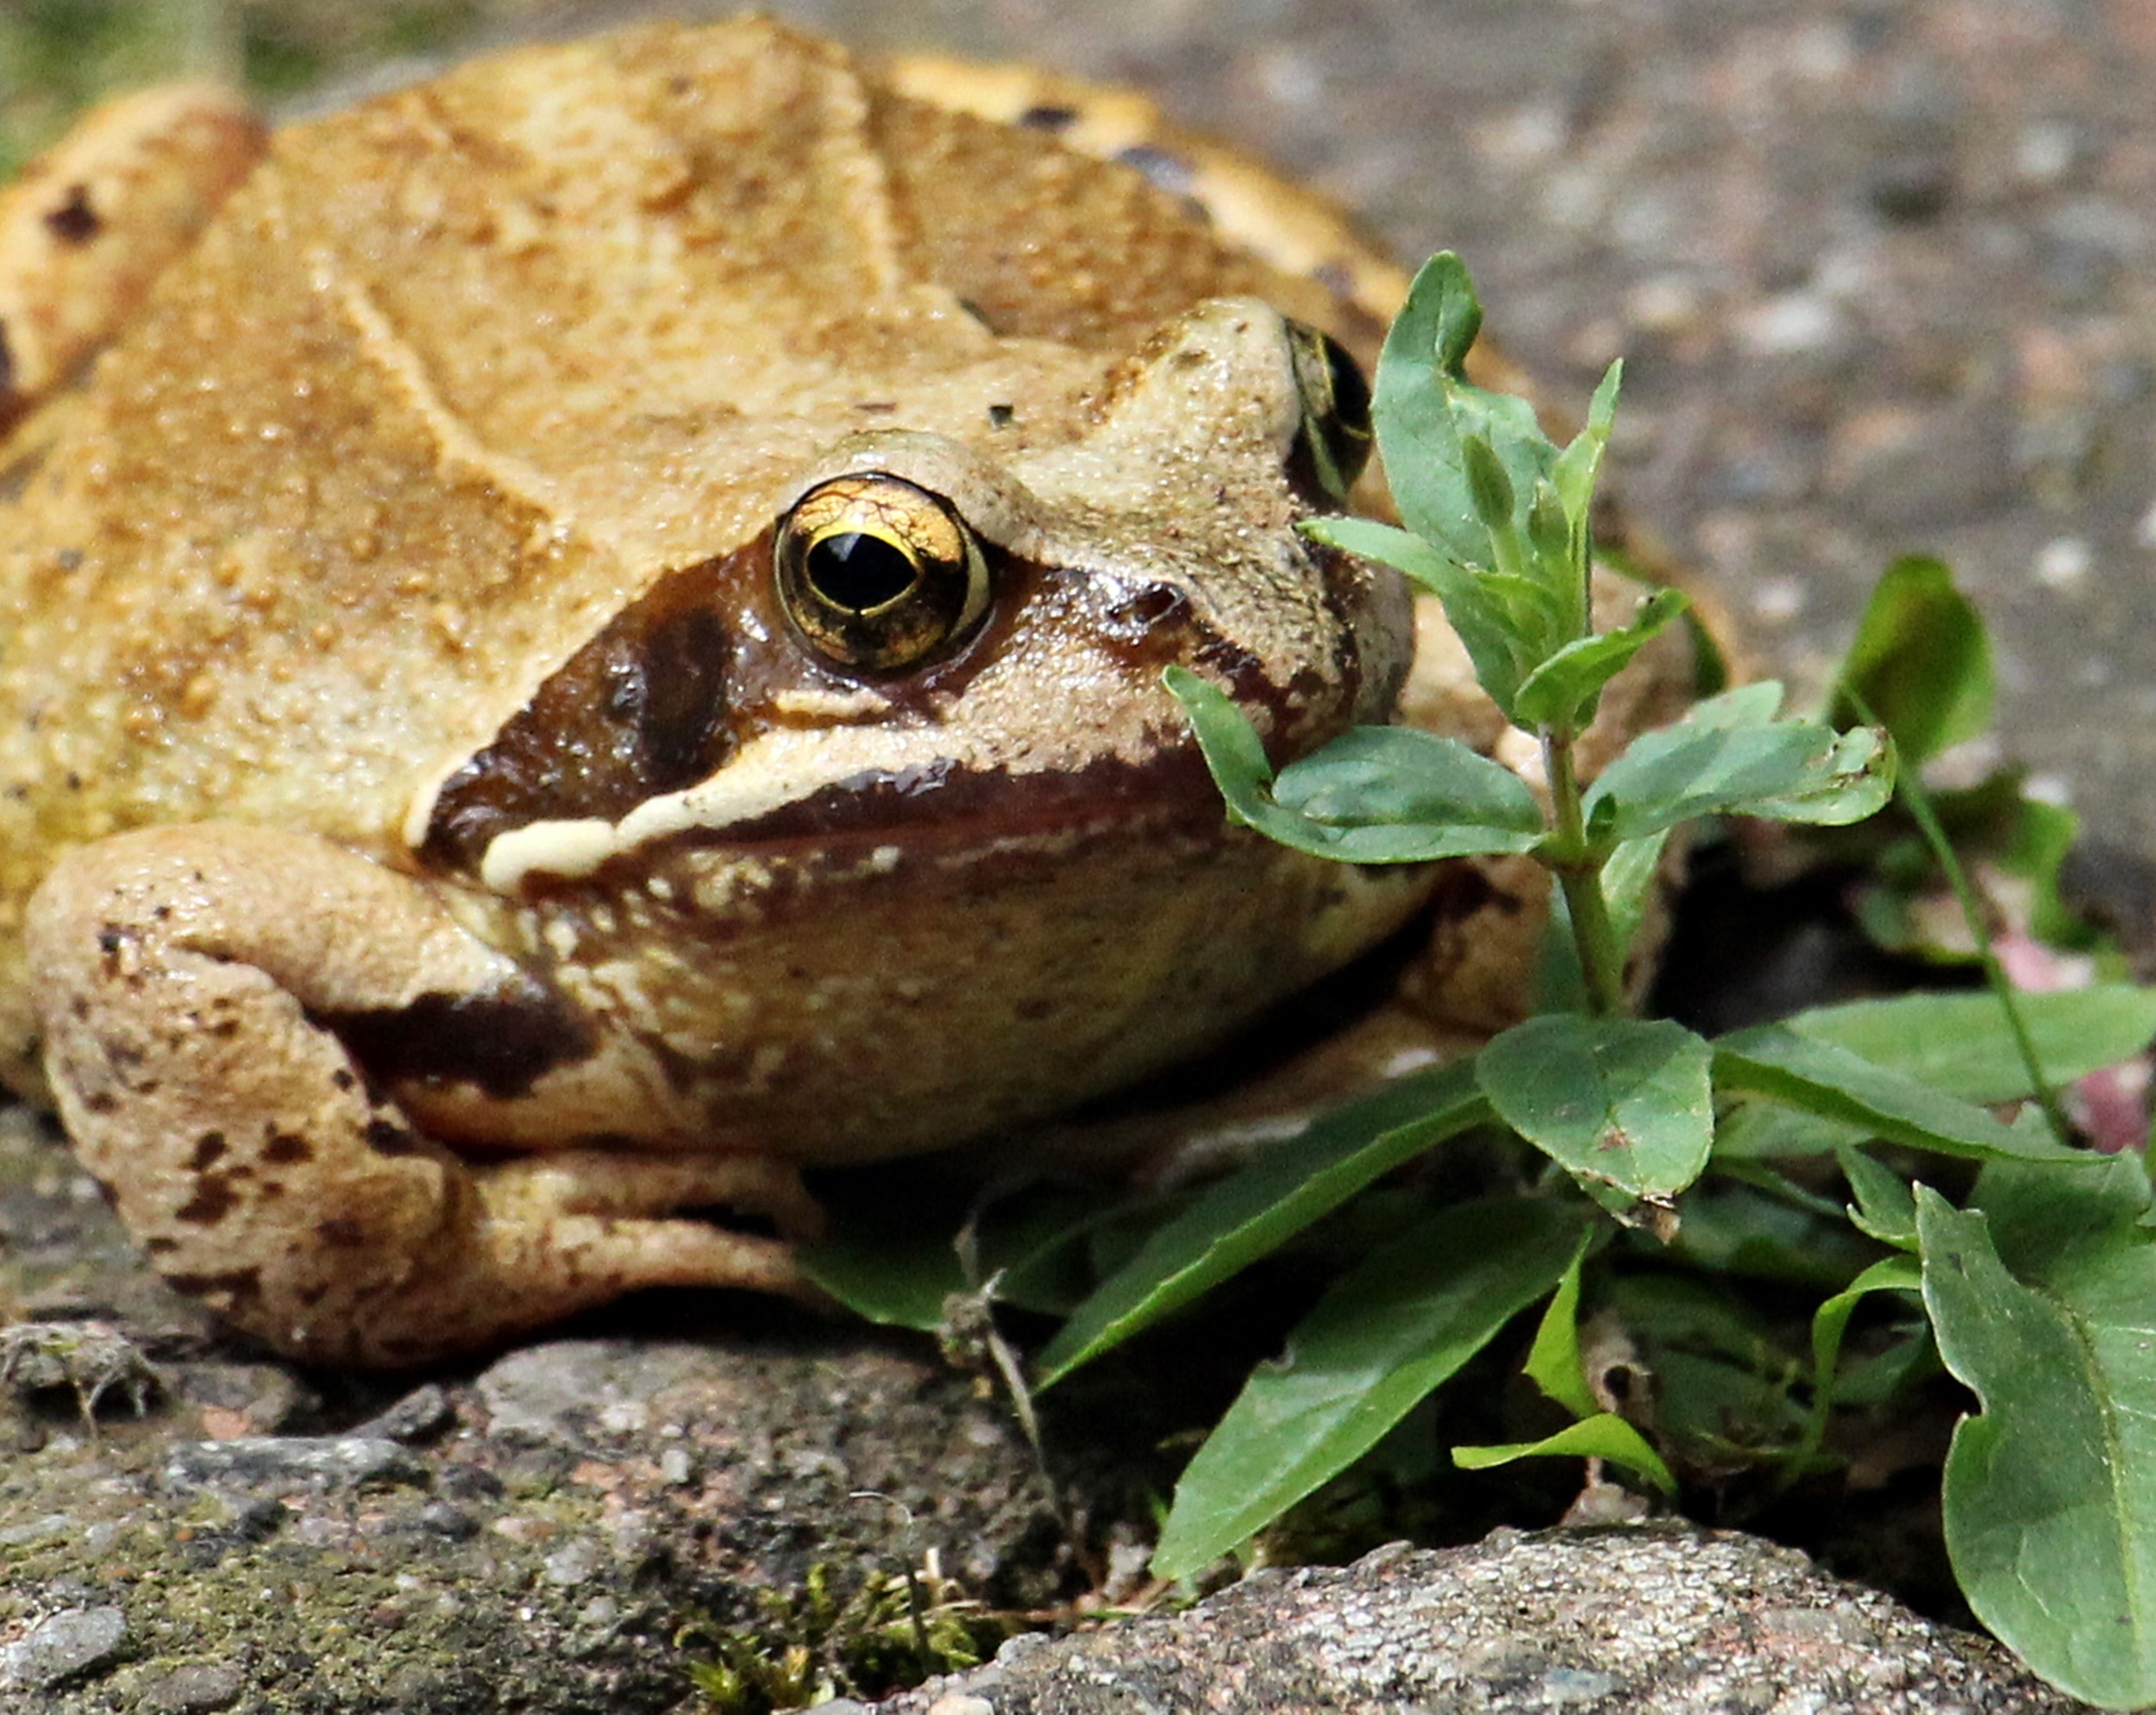 brown toad